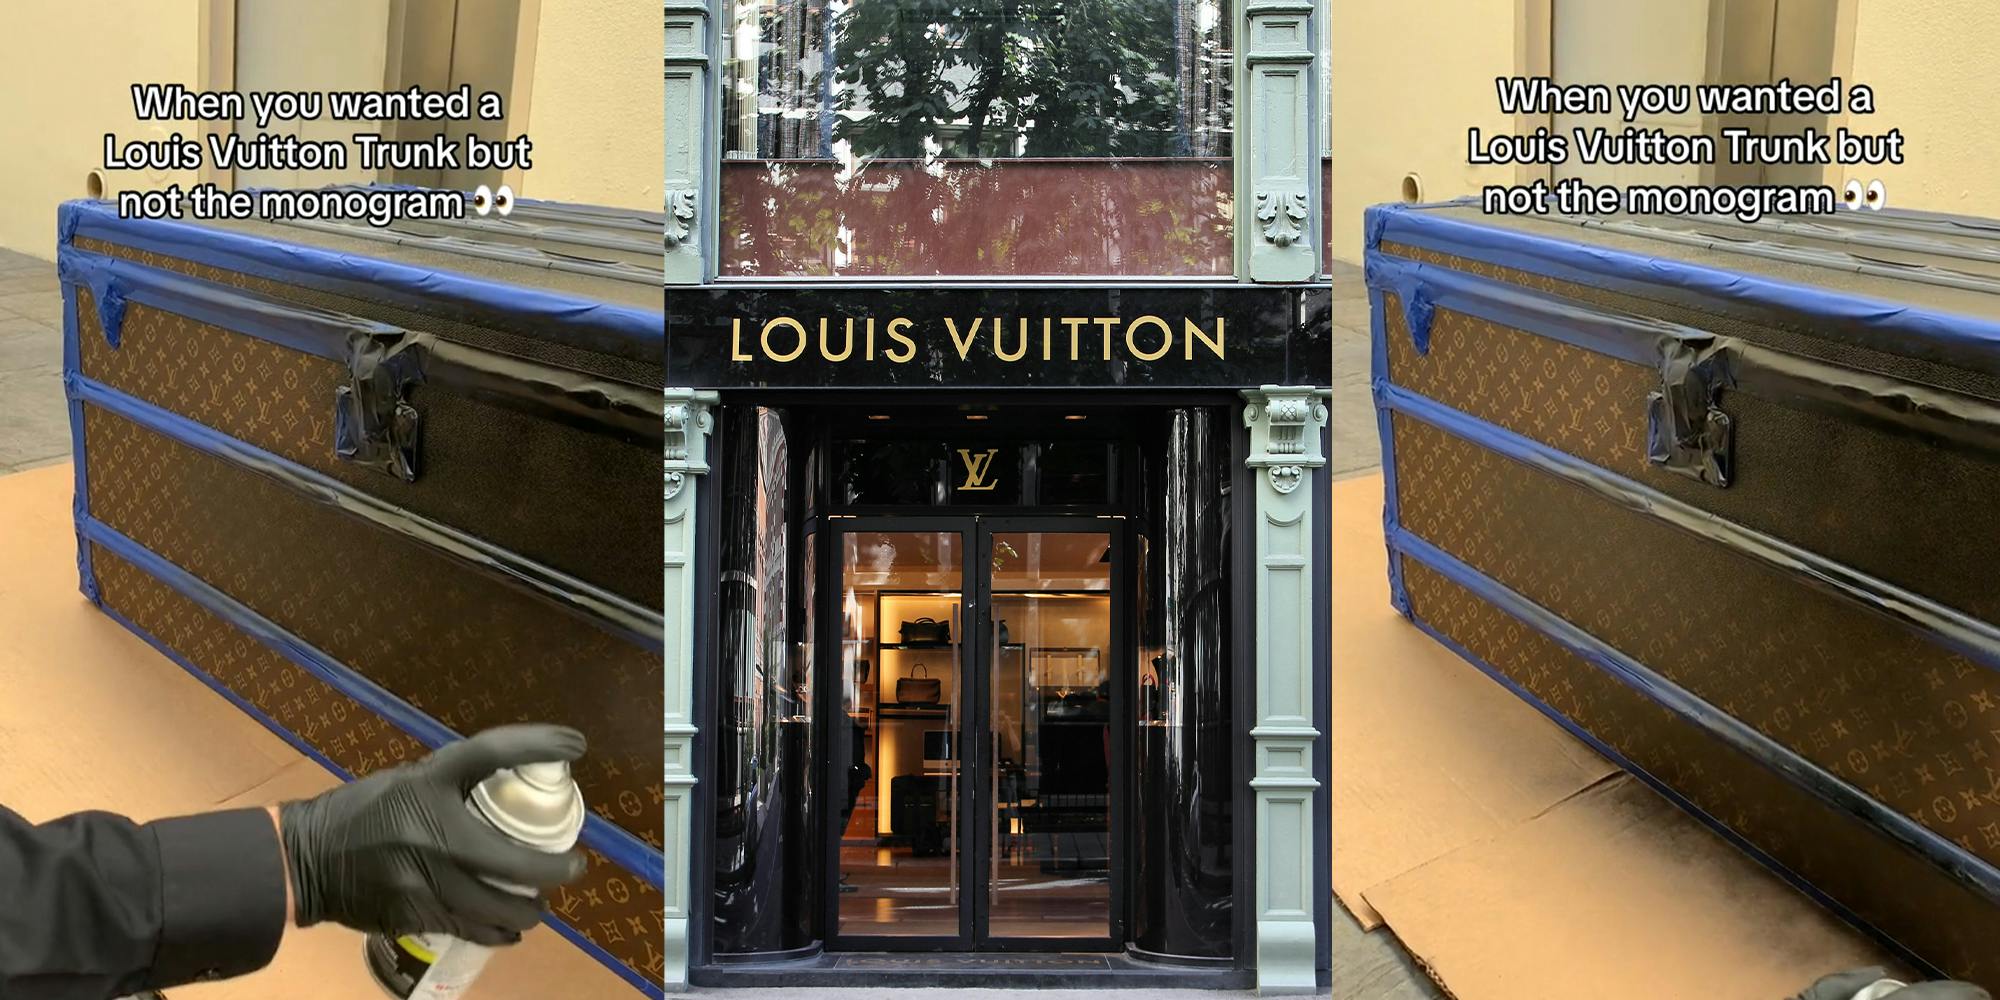 Viewers Outraged After Artist Spray-Paints Louis Vuitton Trunk